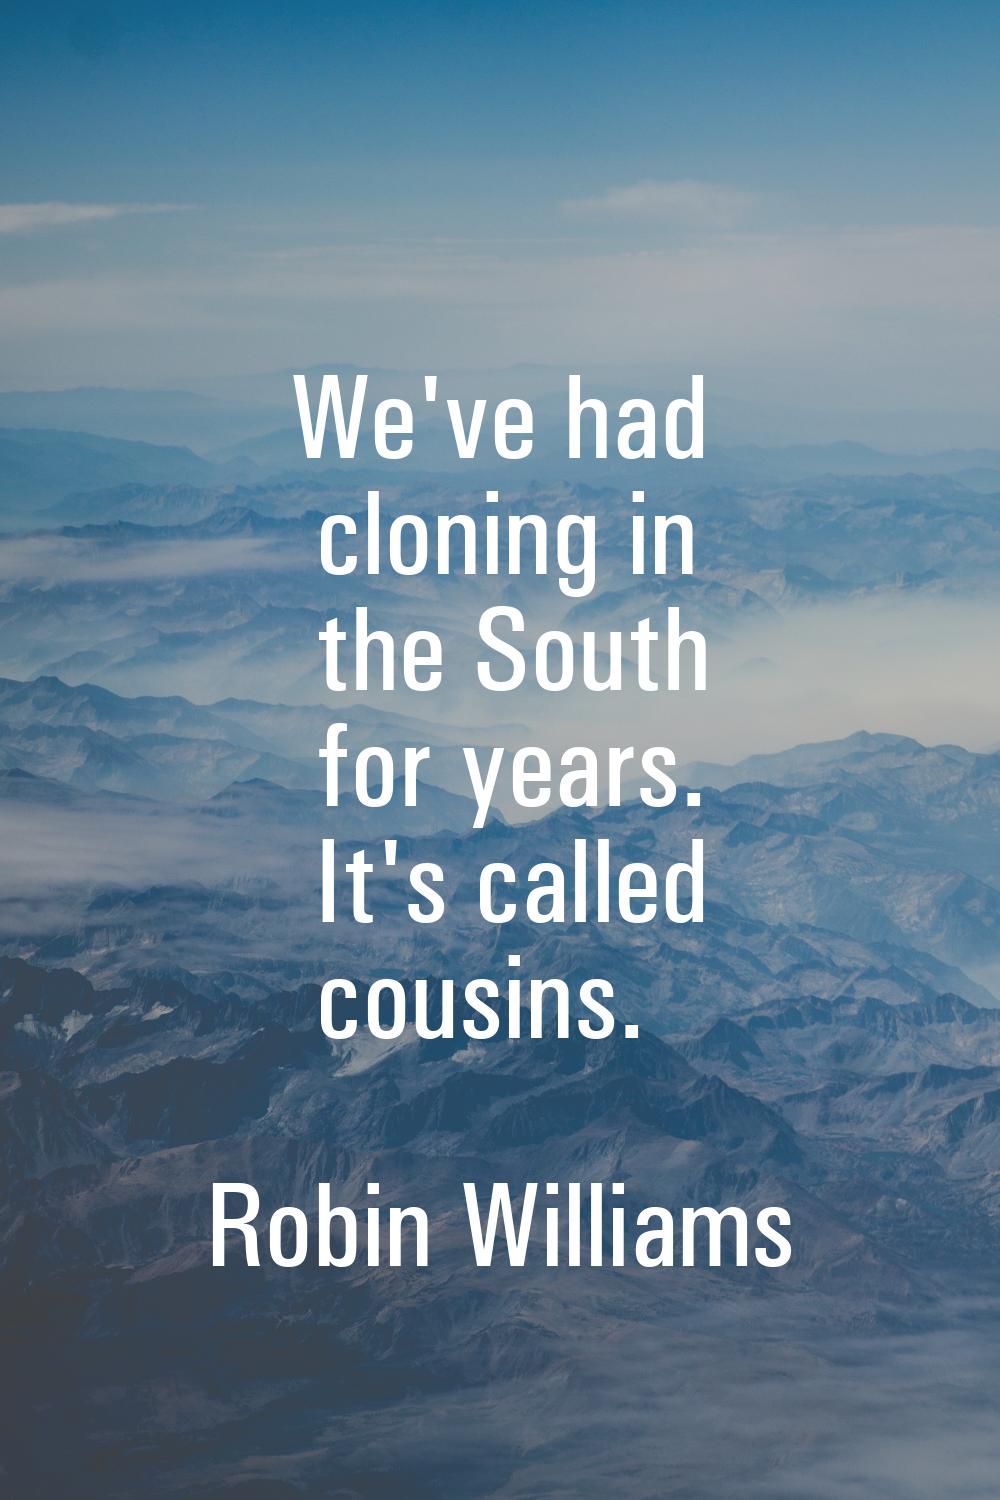 We've had cloning in the South for years. It's called cousins.